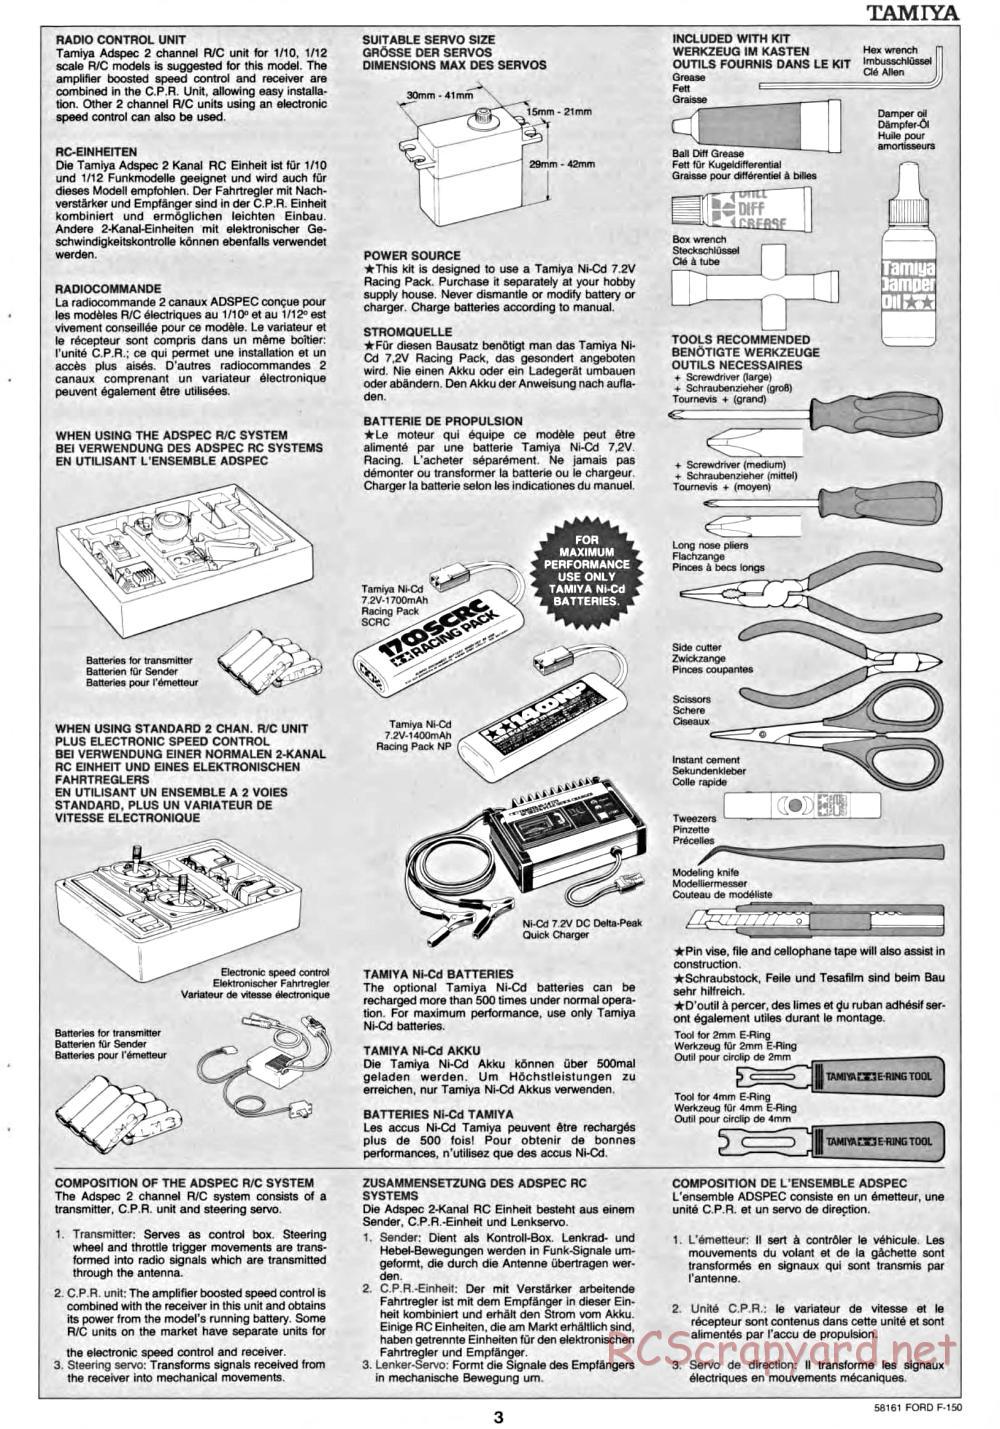 Tamiya - Ford F-150 Truck Chassis - Manual - Page 3